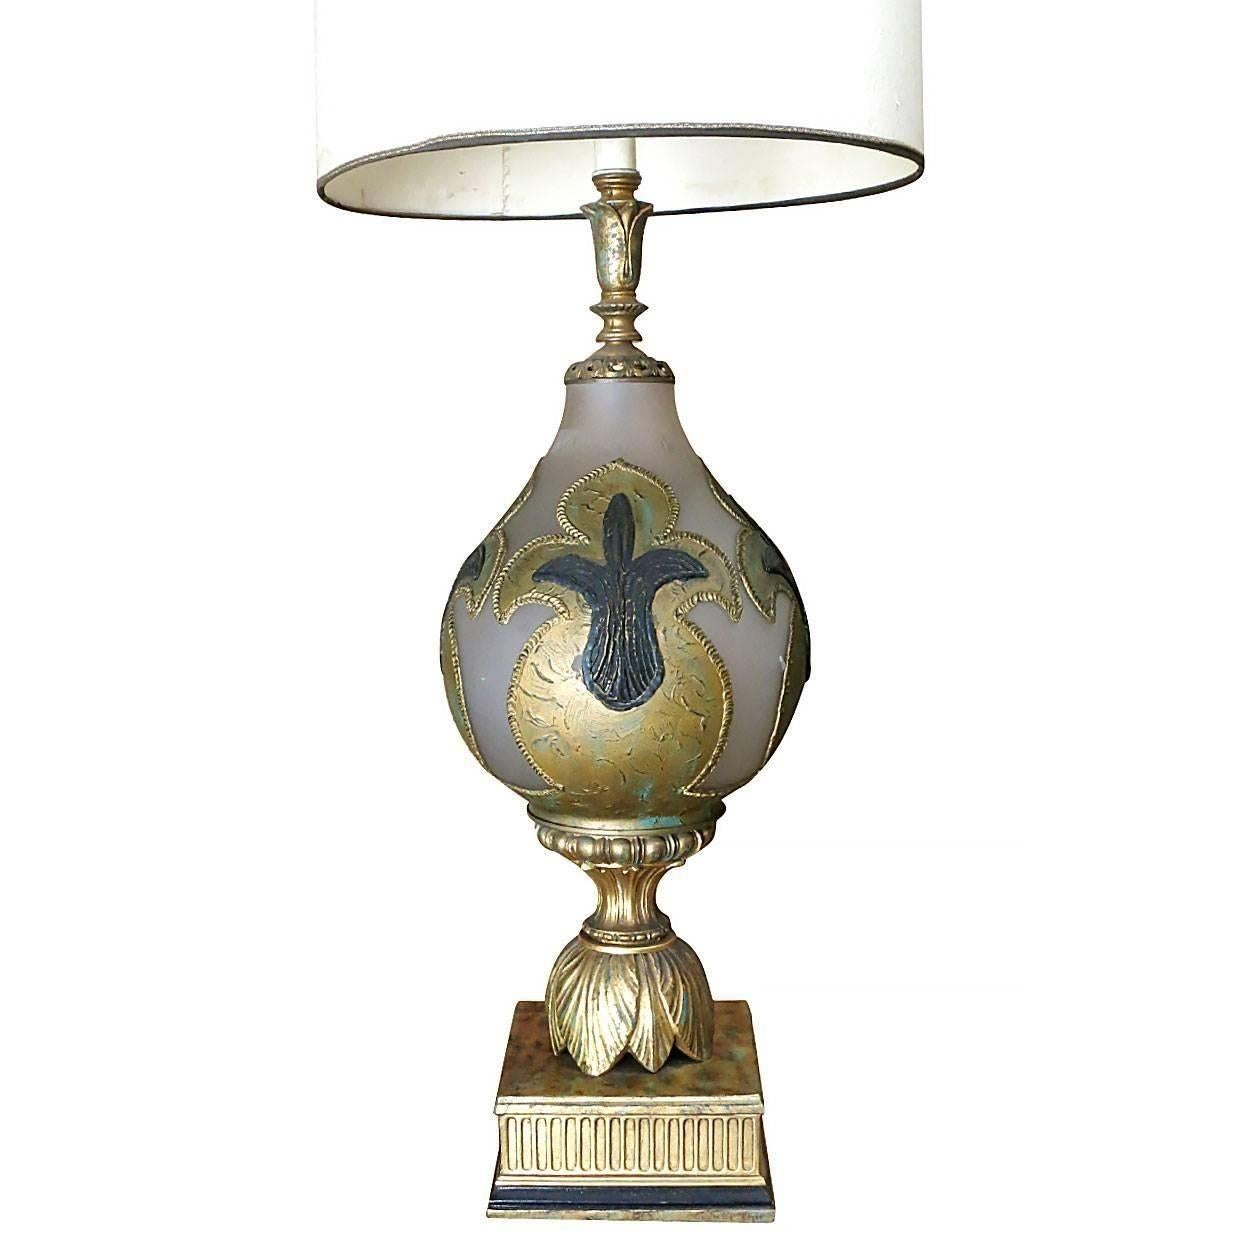 Original Mid-century hand painted frosted glass table lamp pair. The lamp features a brass Regency inspired base connecting to raised Impasto hand painted frosted glass body which ends at brass neck.

The matching original lamp-shade features the